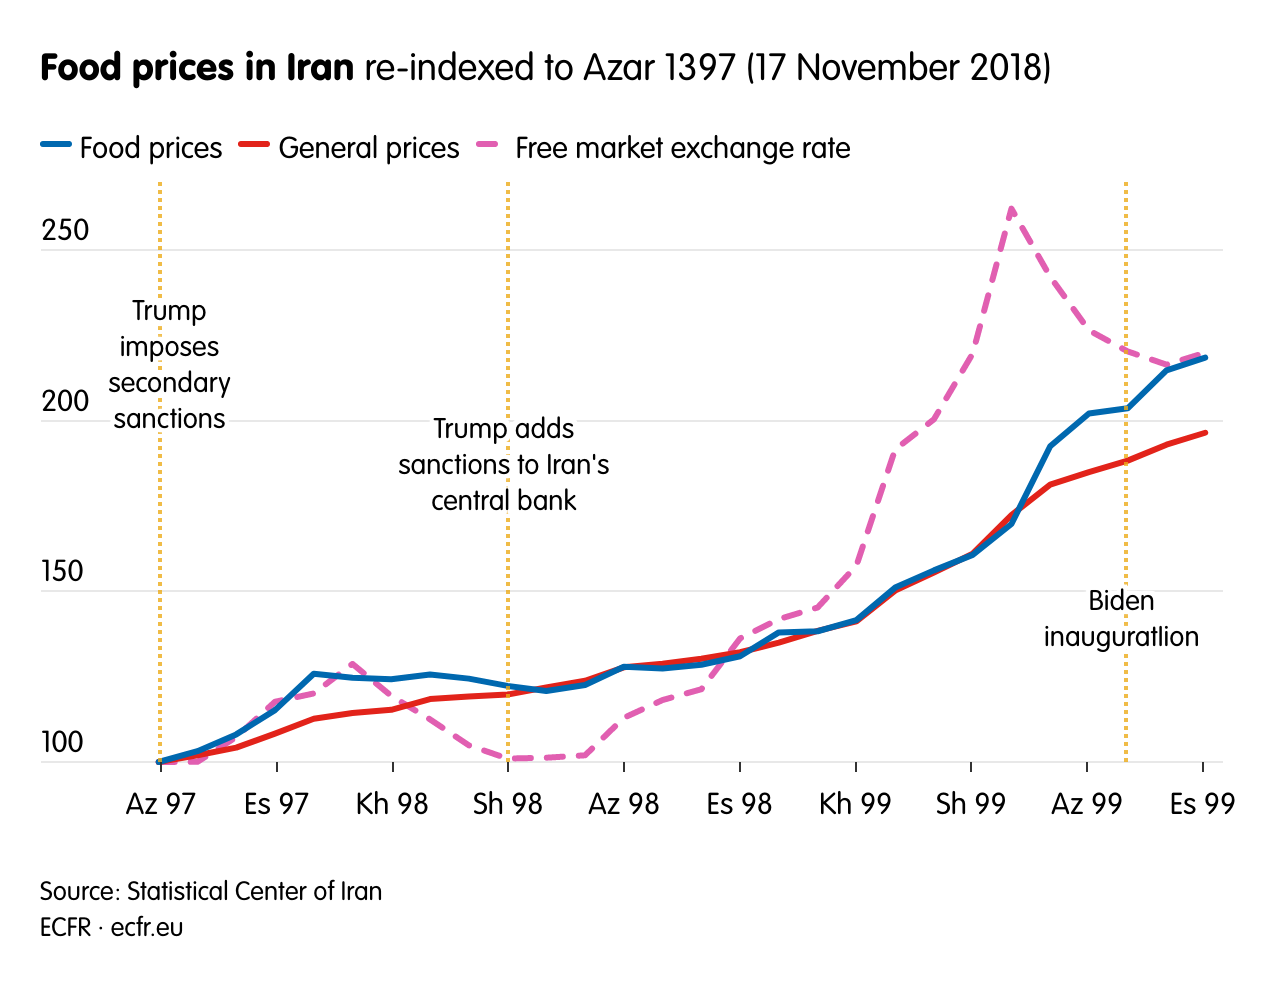 Food prices in Iran
